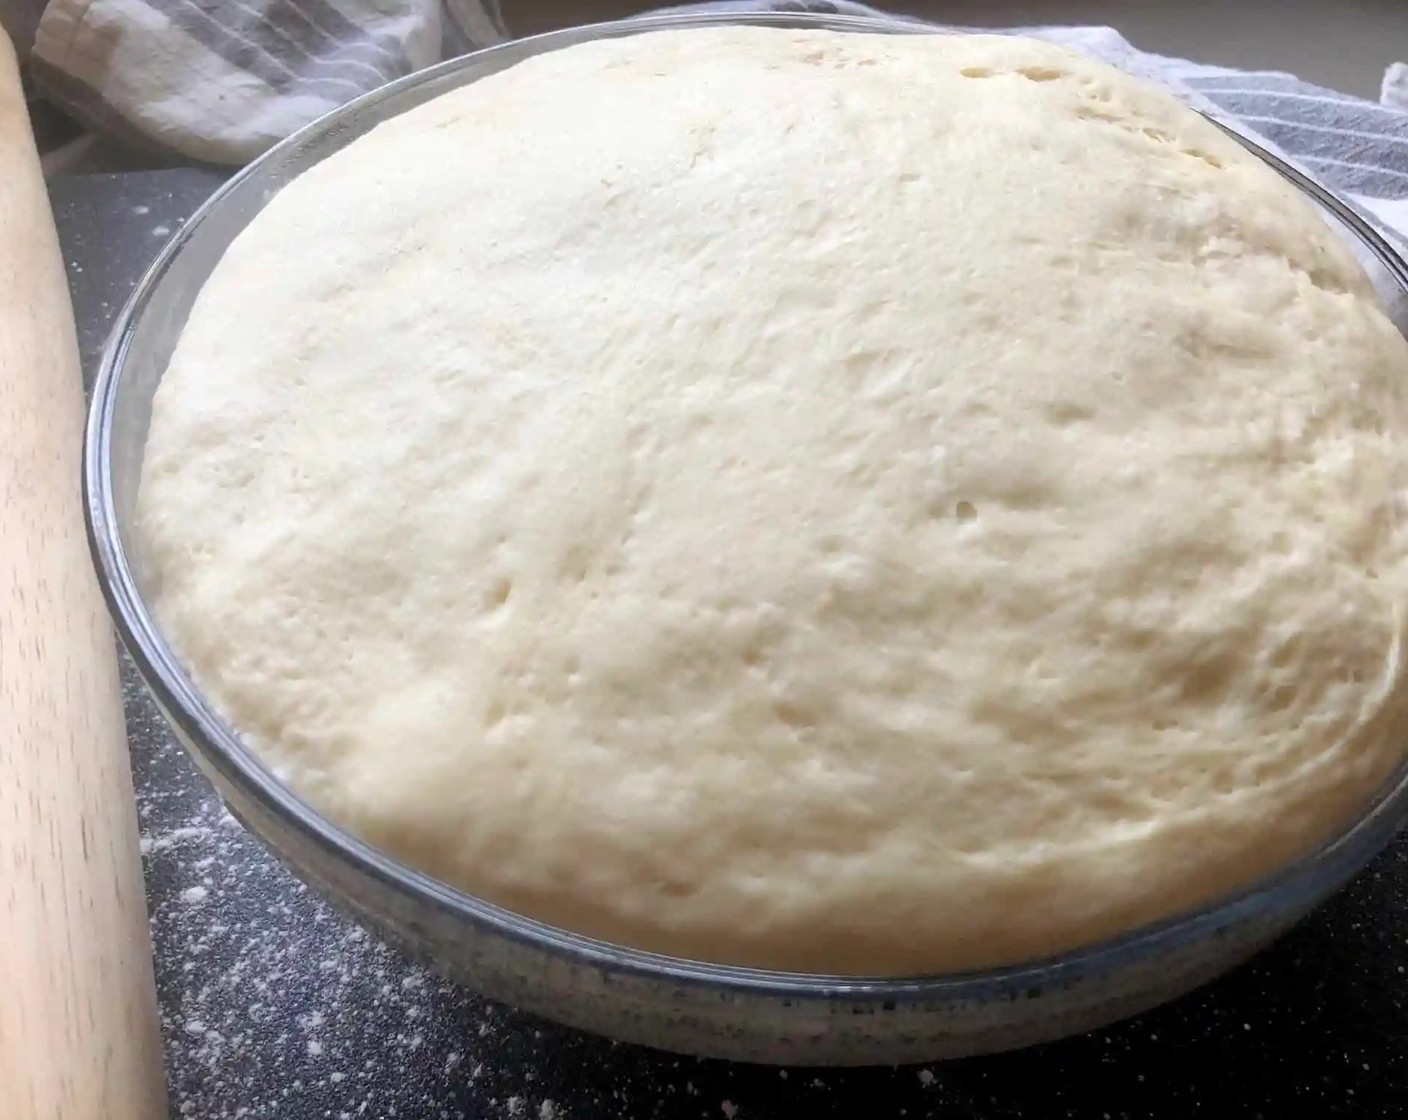 step 5 When the dough has doubled in size, turn it out onto a lightly floured work surface, punch it down, and roll it into a ball using your hands. Roll the dough into a rectangle measuring about 12x18-inches.